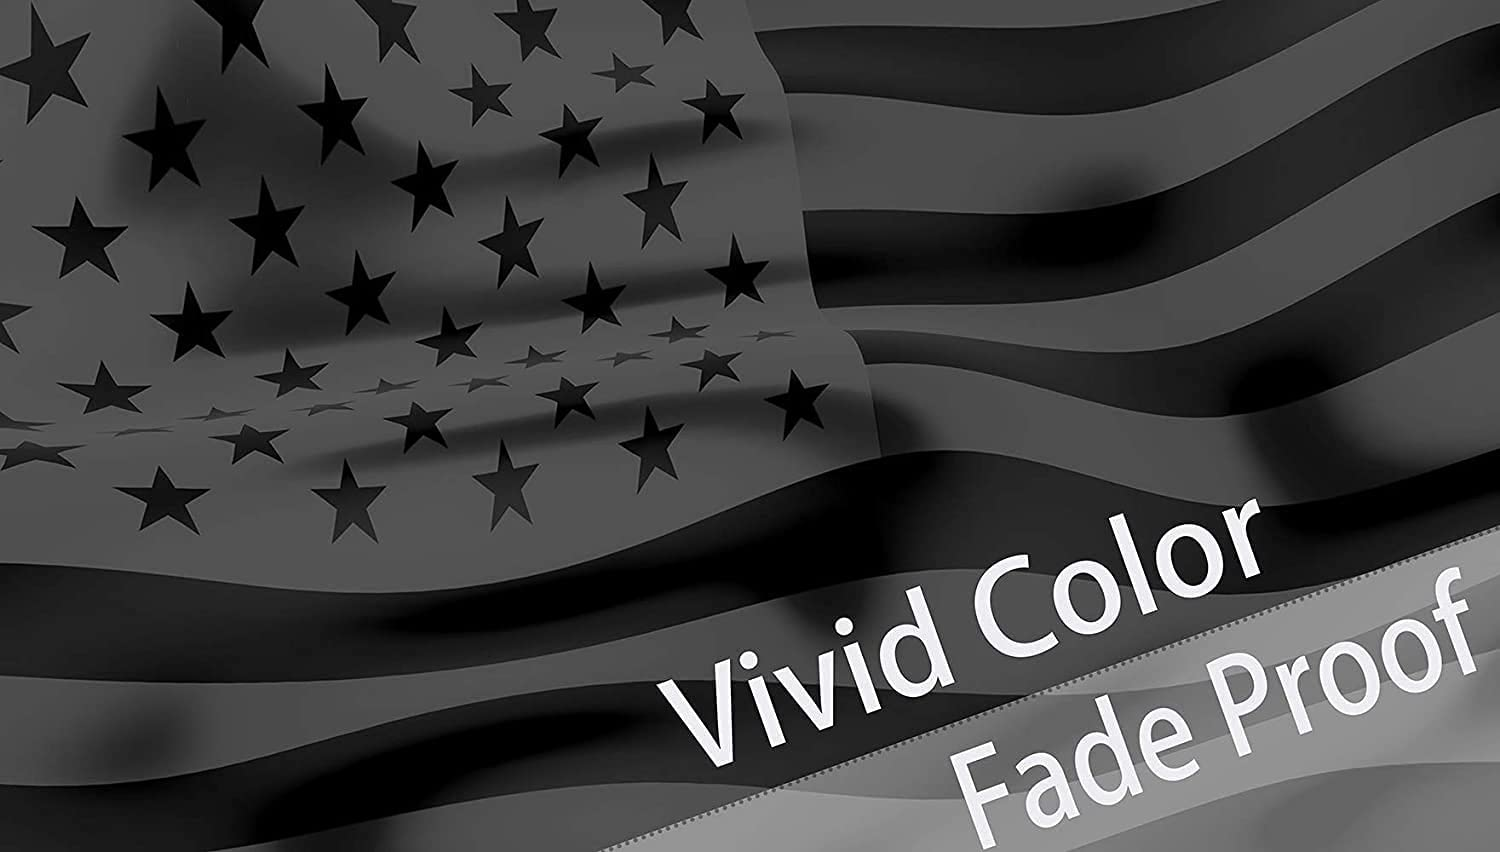 Black American Flag 3X5 Ft Black USA Flag, Brass Grommets Black American Flags, Durable & Fade Resistant Black US Flag for All Weather, Outdoor Fly American Black Flag, Car, Farm